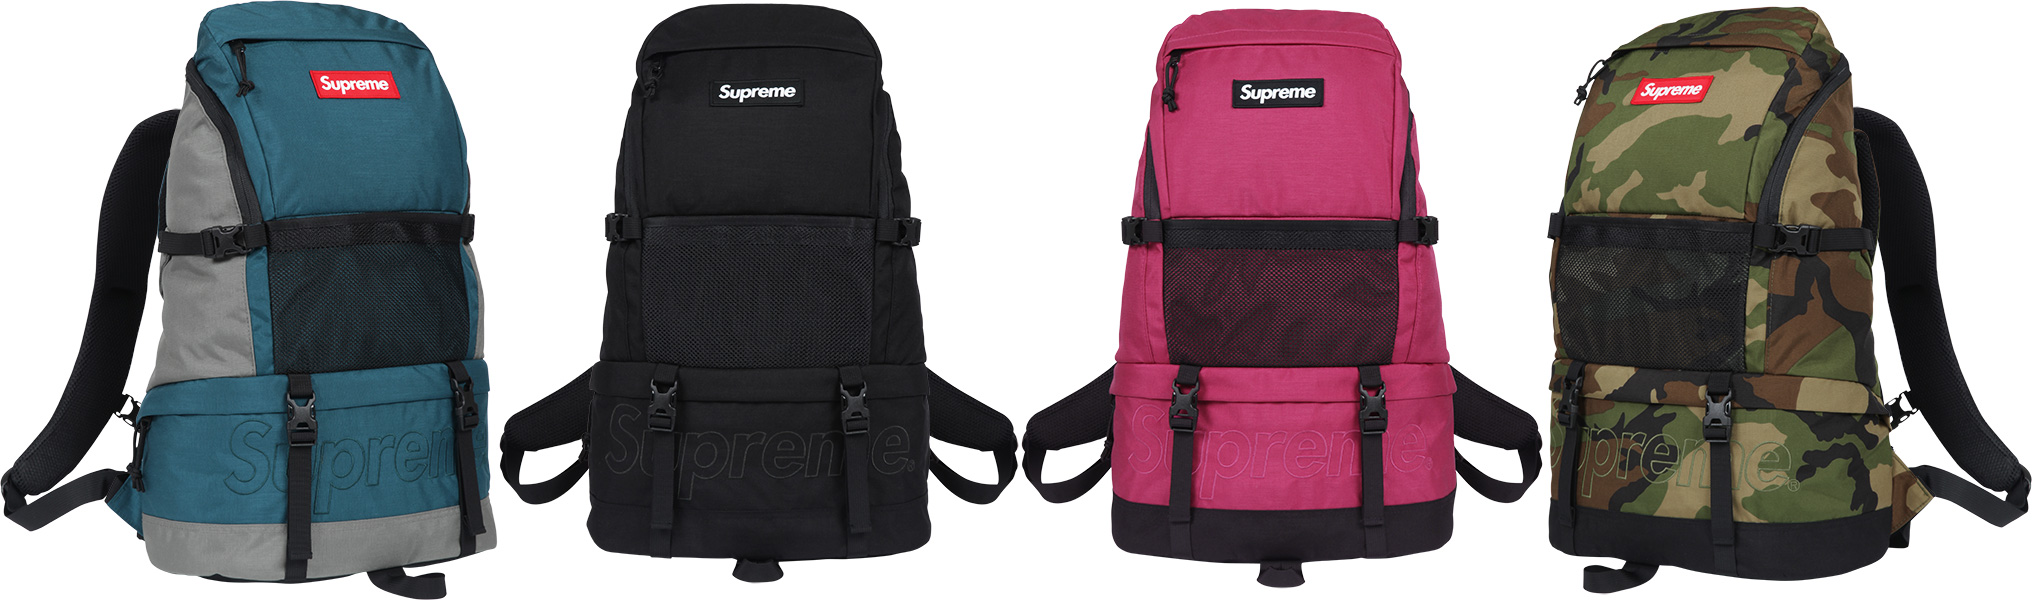 SALE】 Supreme Contour 新品未使用1 15fw Backpack バッグ - www ...